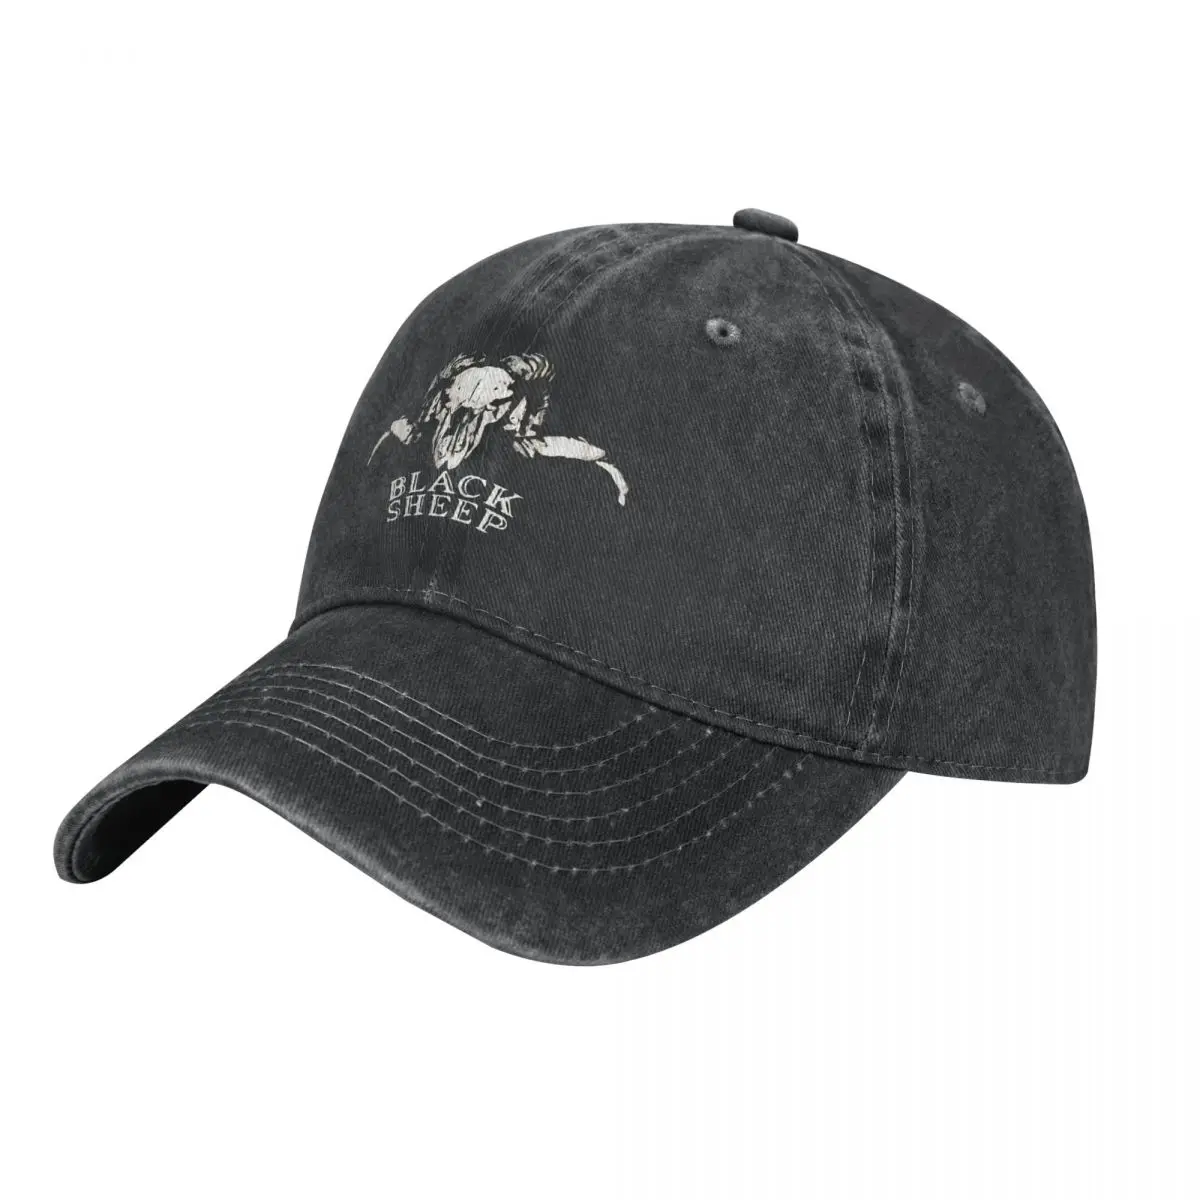 

The Black Sheep of the family (White) Cowboy Hat Golf Cap Beach Outing Snapback Cap tea Hat Mens Hats Women's